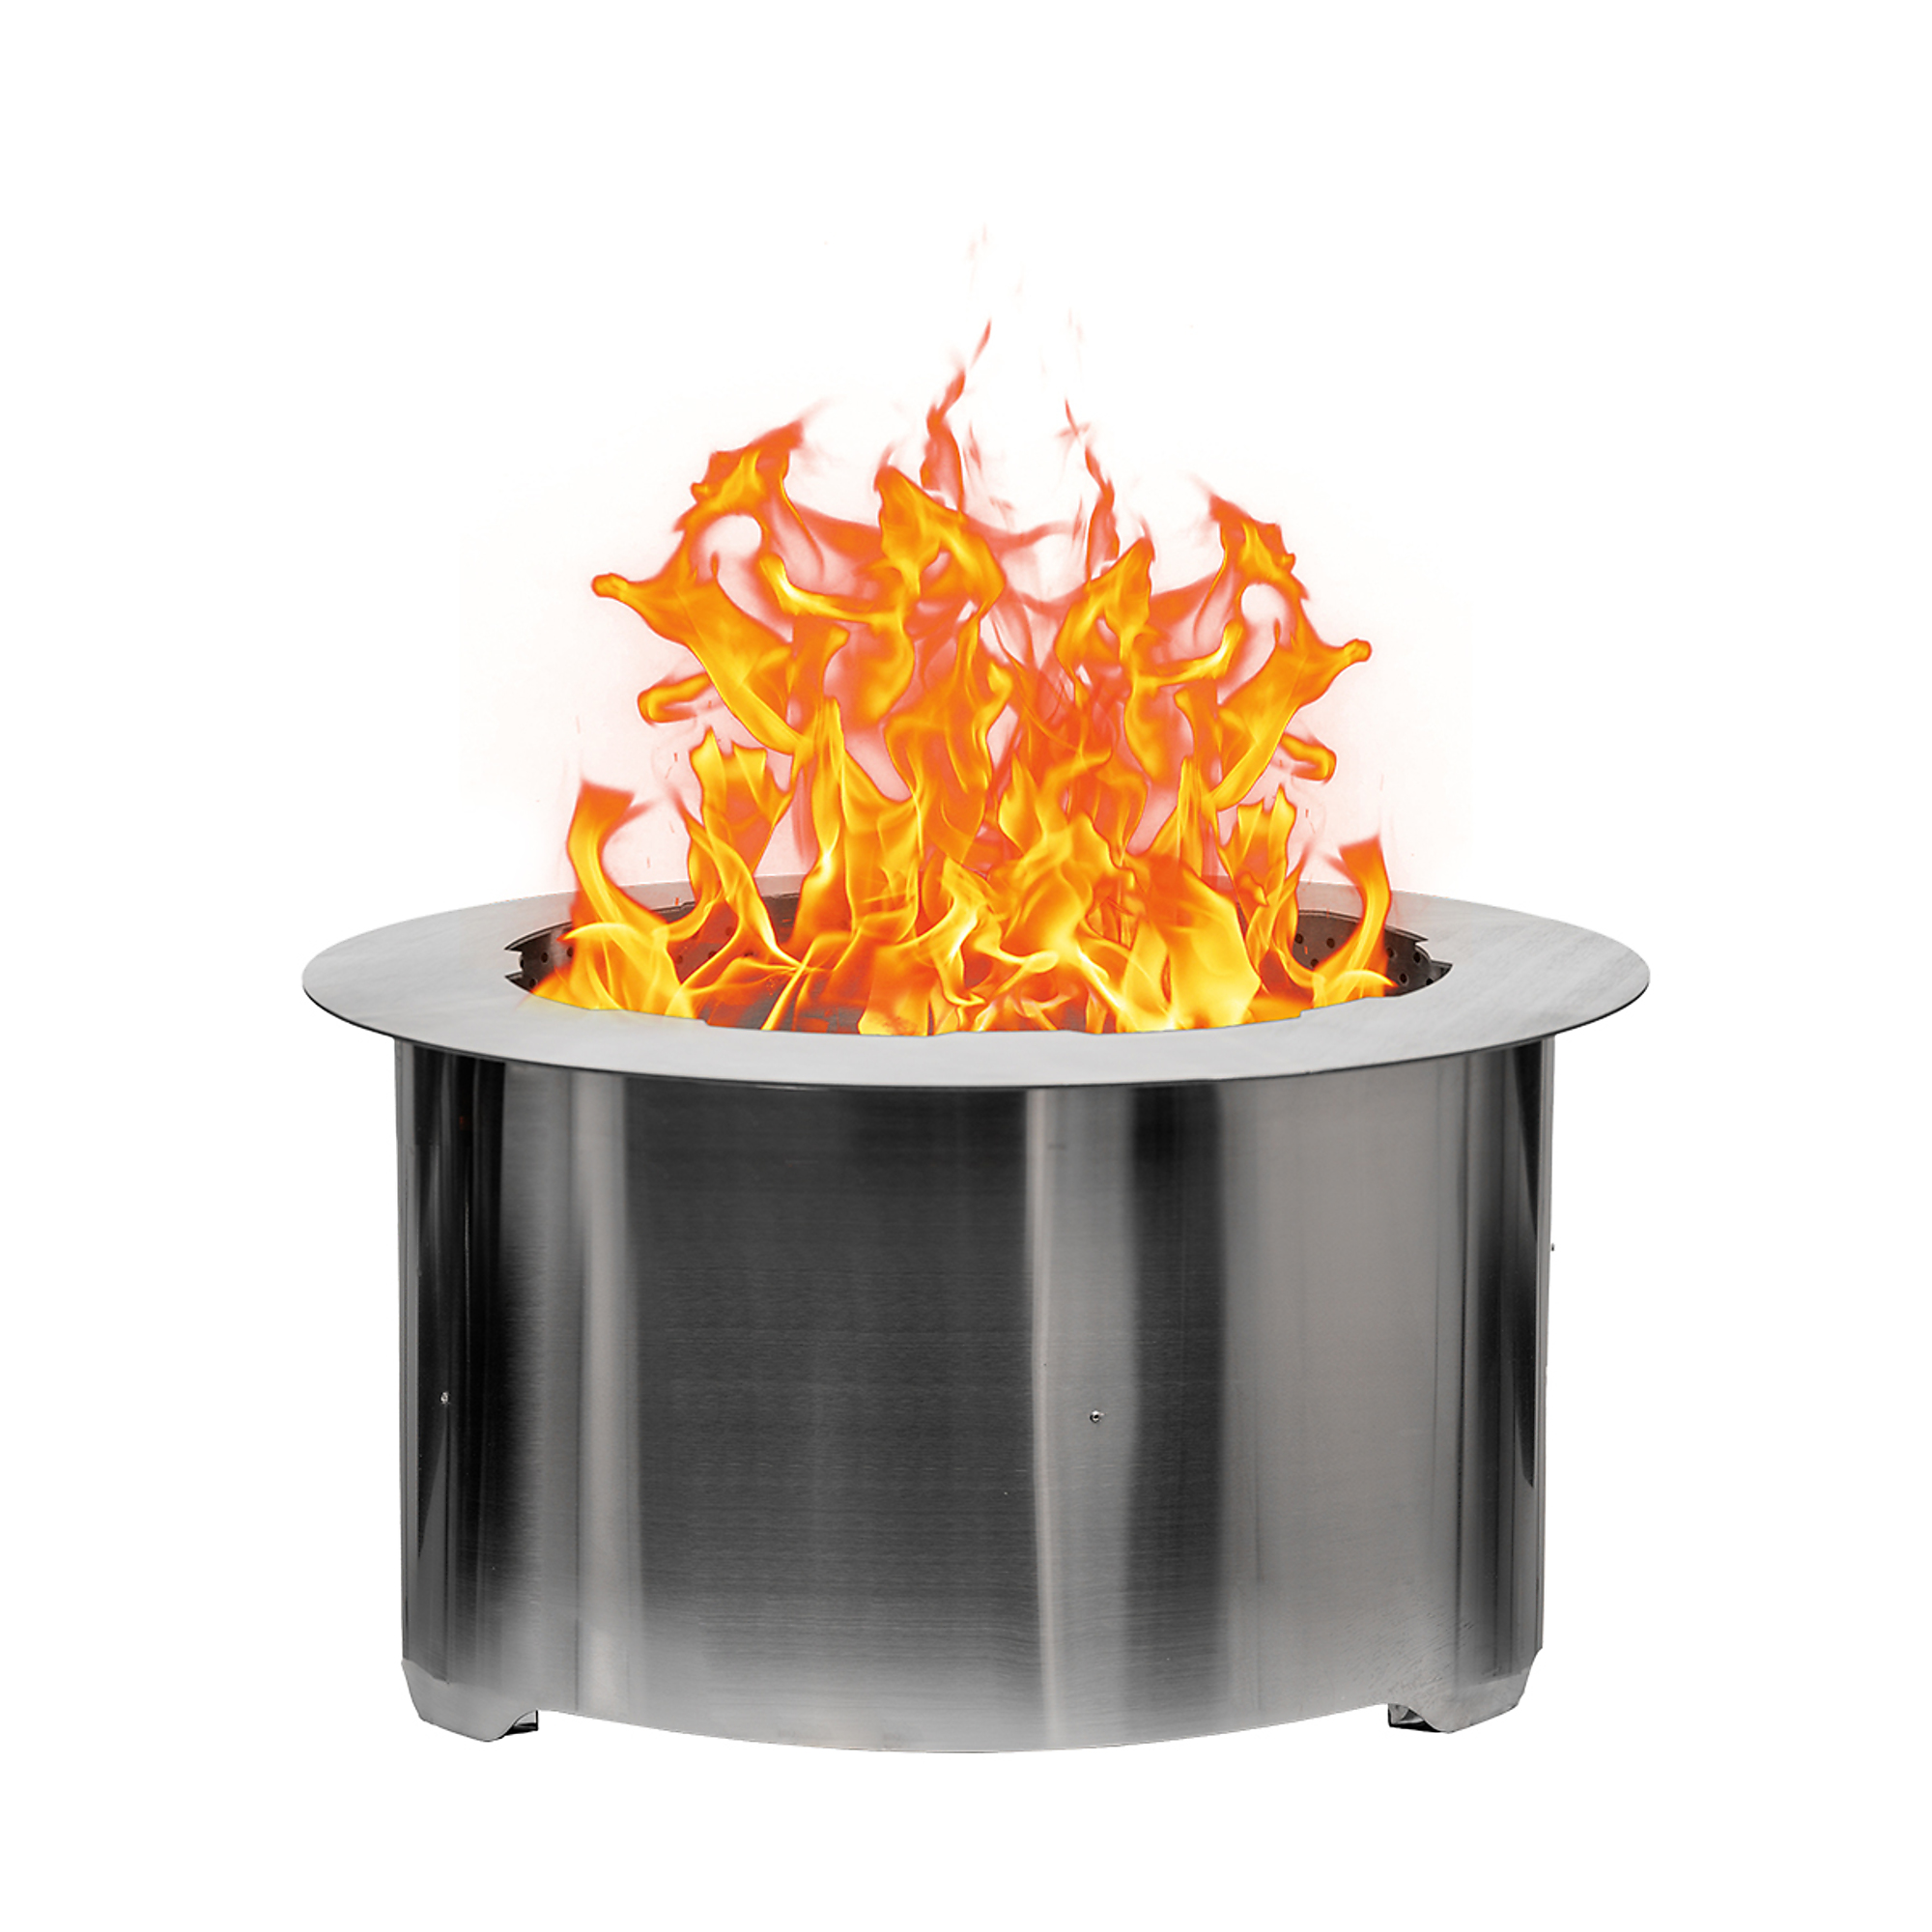 US Stove Company, US Stove Smokeless Firepit, Material Stainless Steel, Model USSLP31